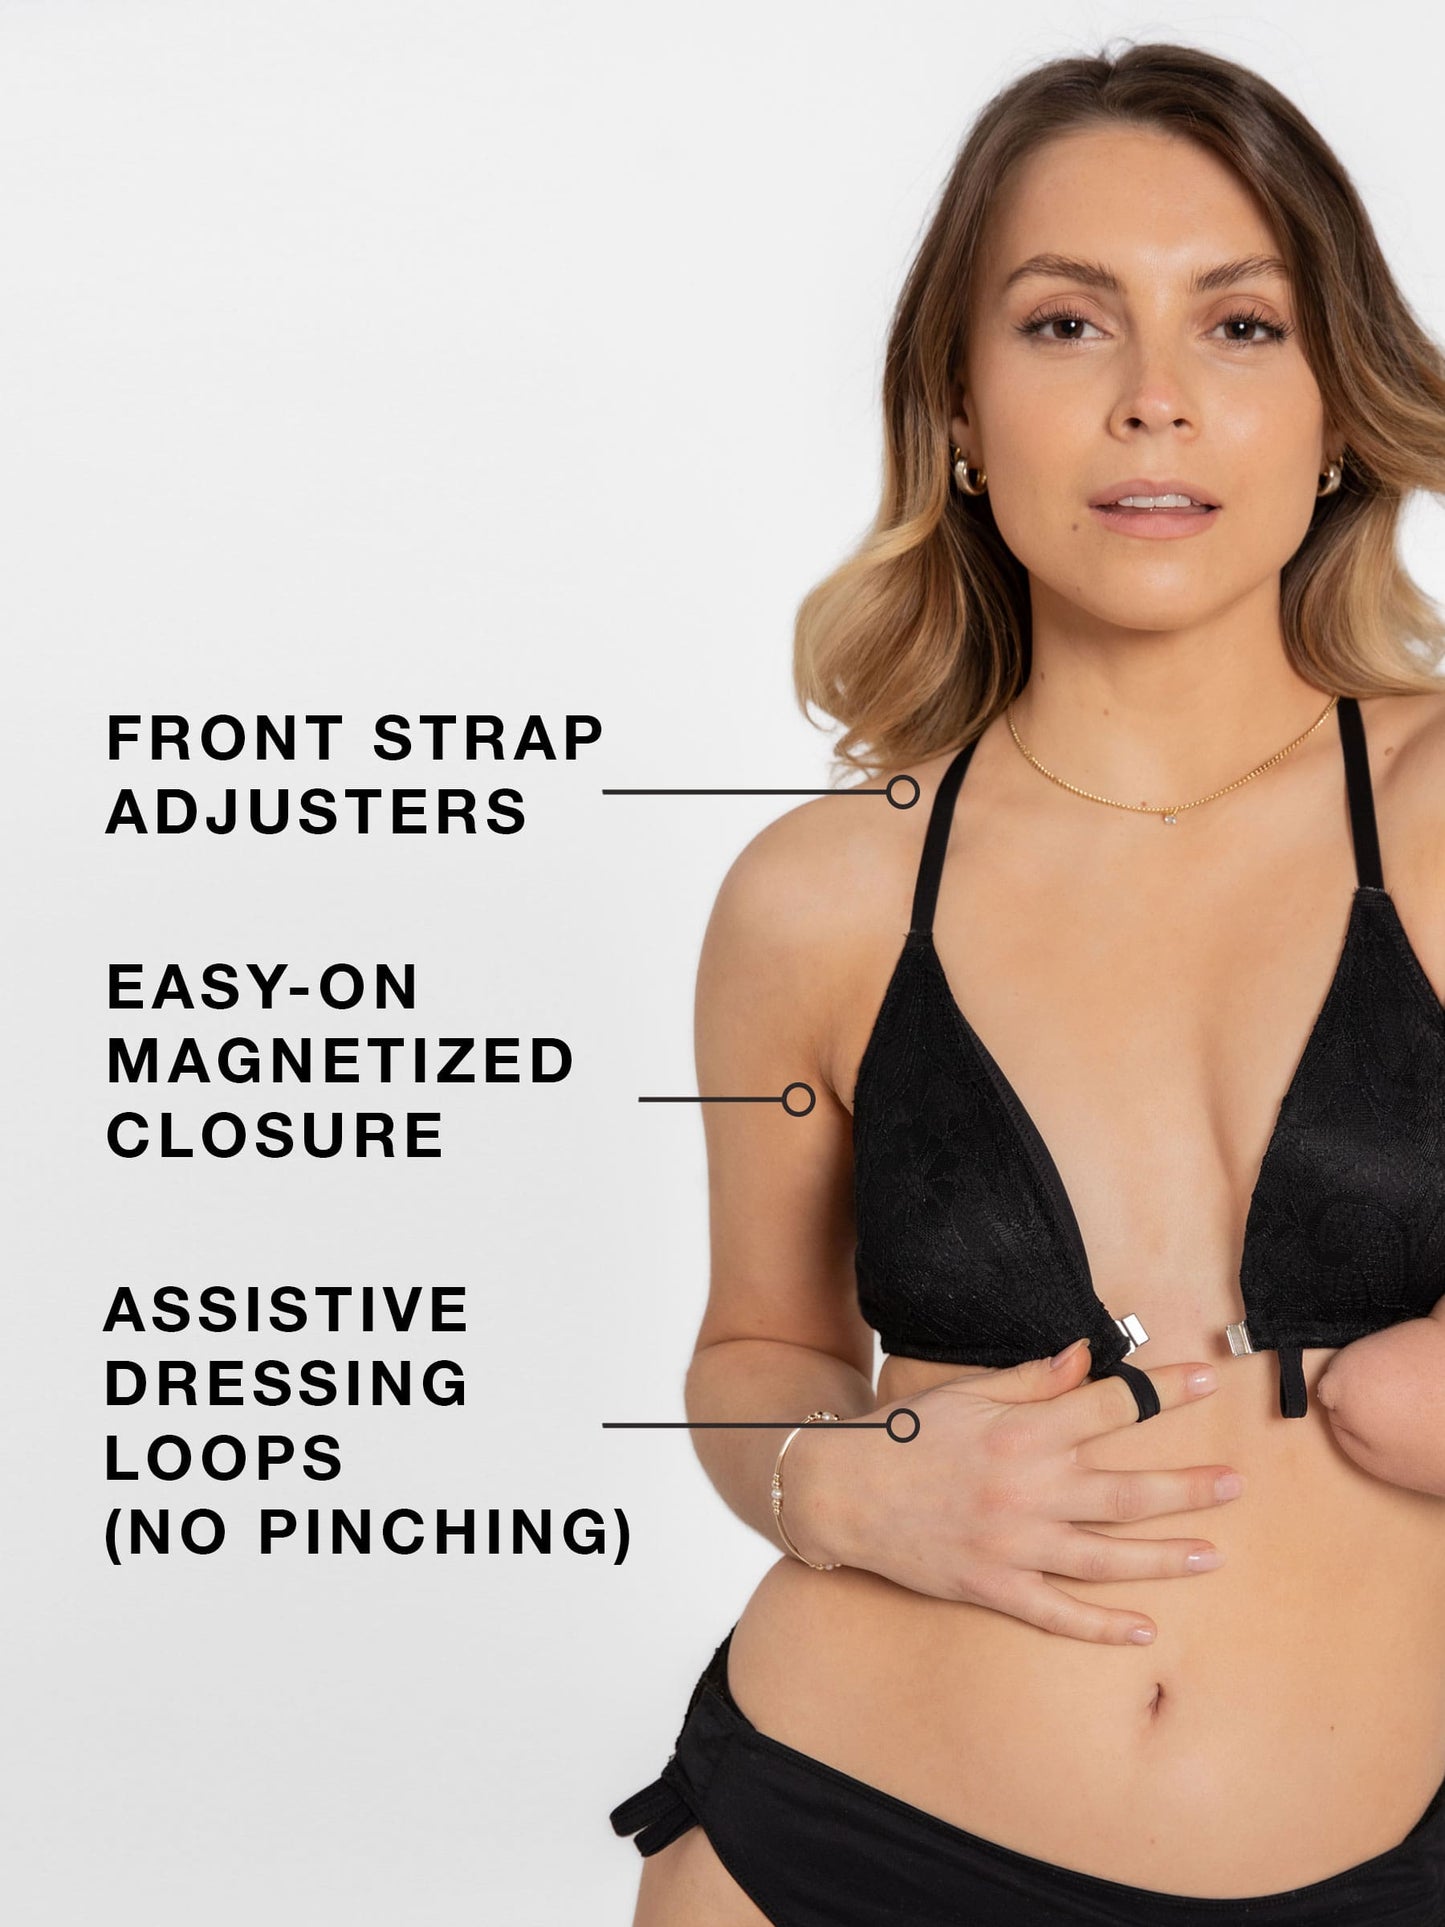 FRONT STRAP ADJUSTERS. EASY-ON MAGNETIZED CLOSURE. ASSISTIVE DRESSING LOOPS (NO PINCHING)